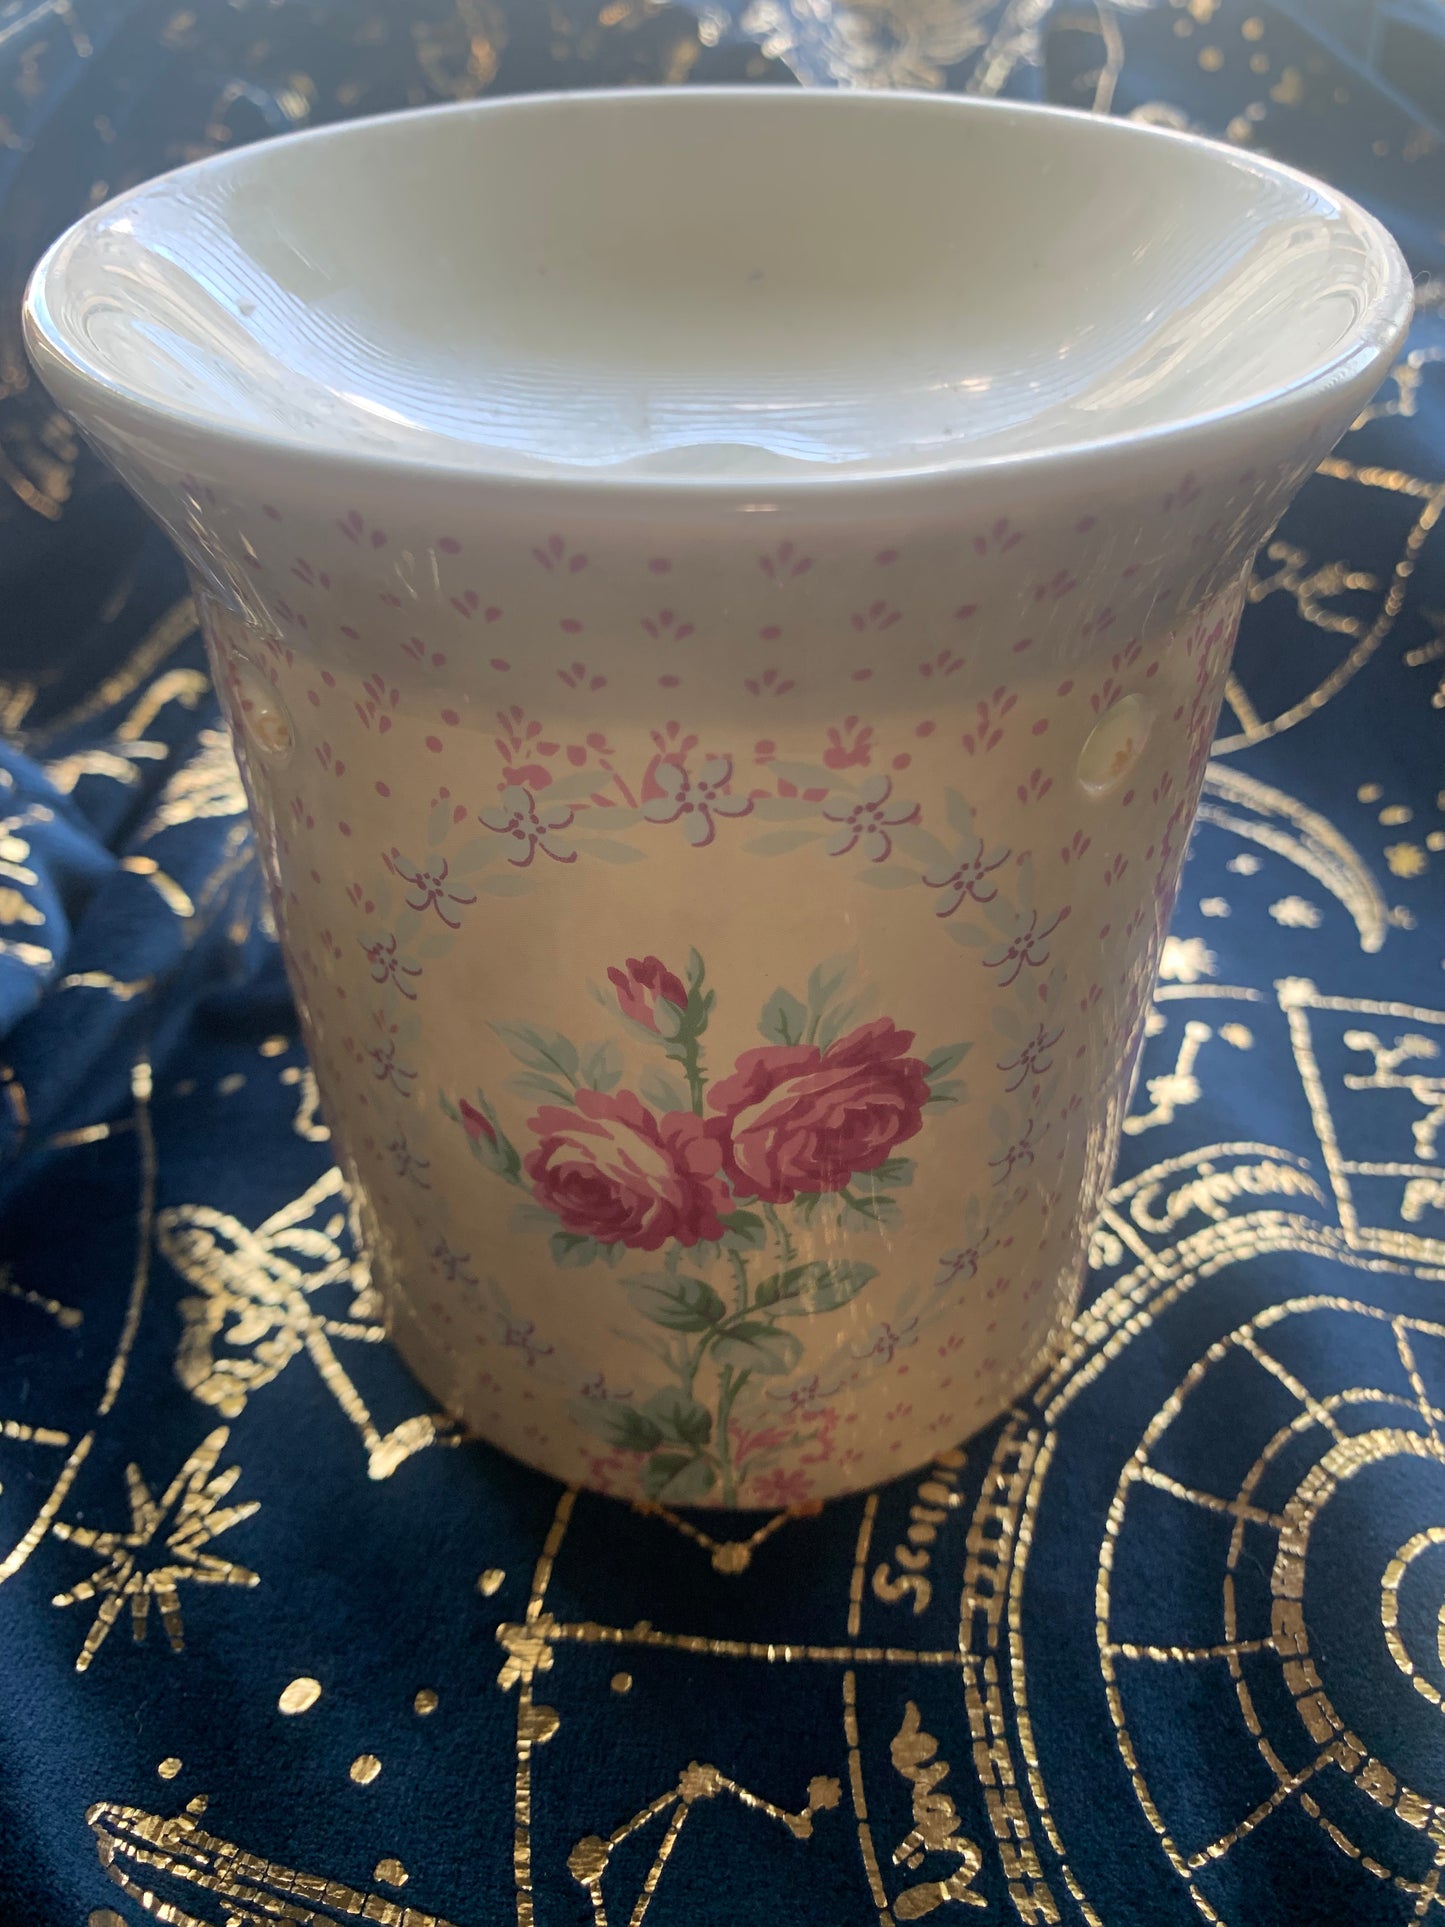 rose yankee candle wax melter